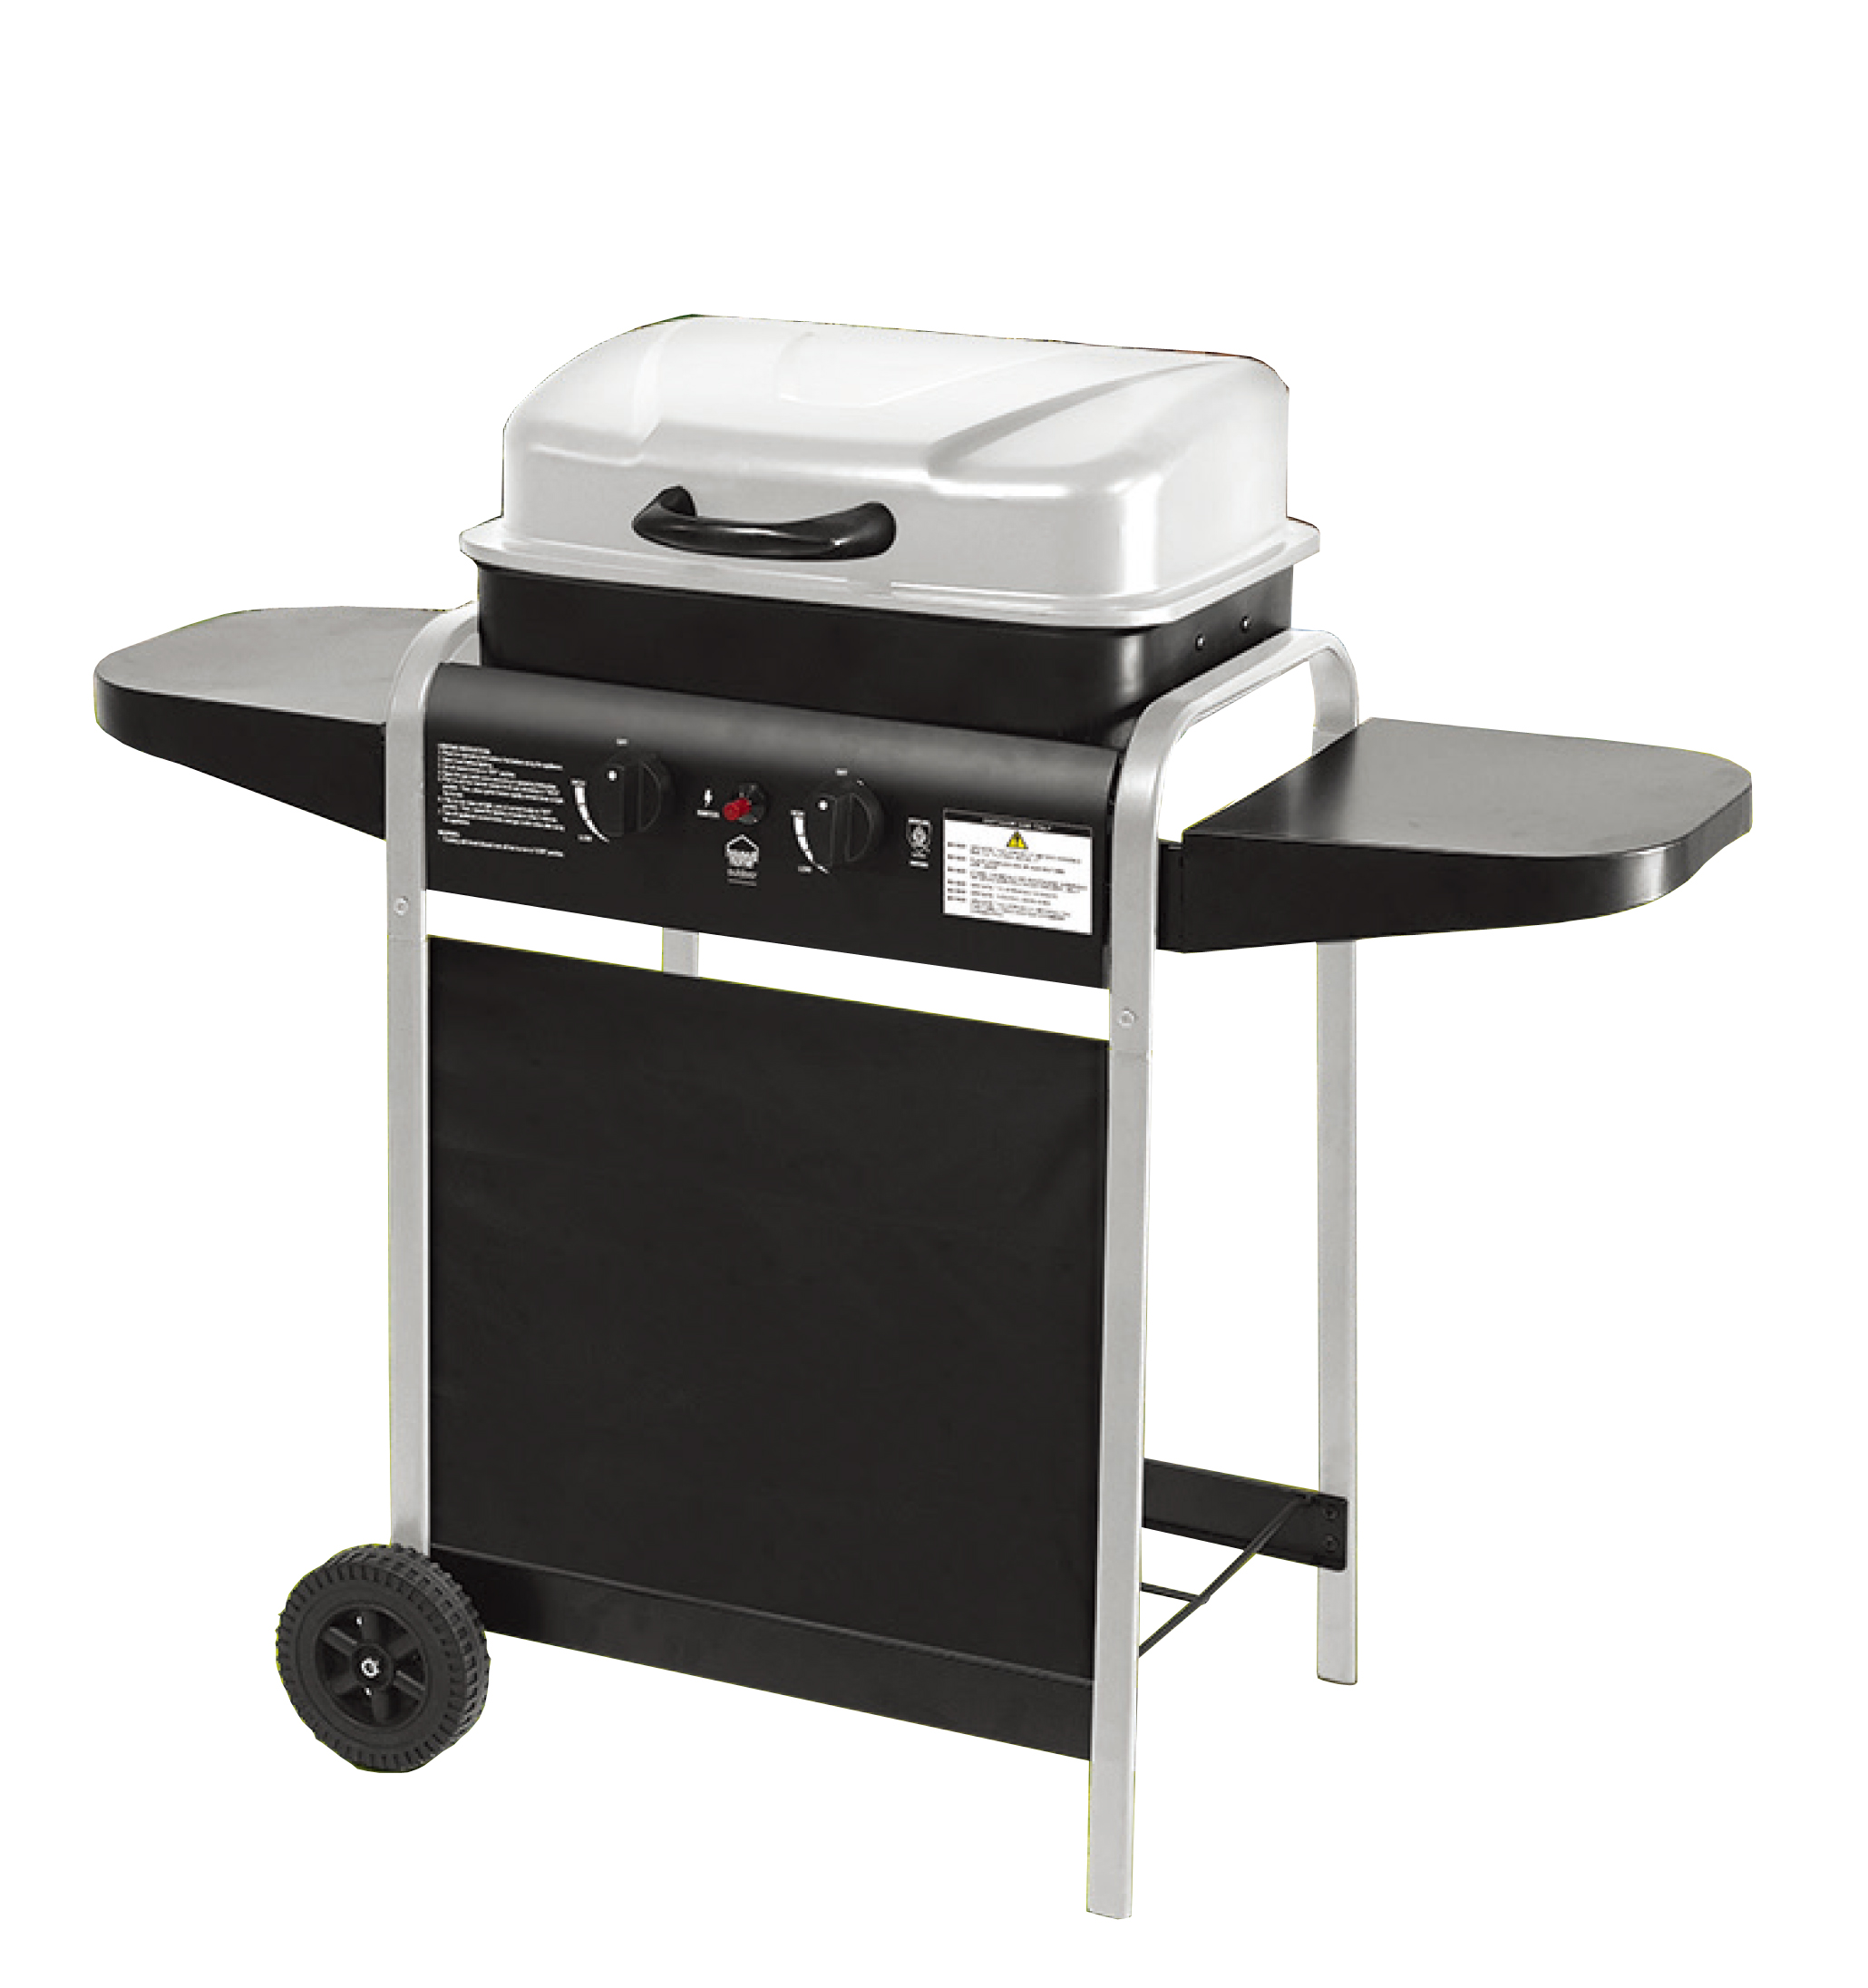 GY-01 Gas Charcoal Grill